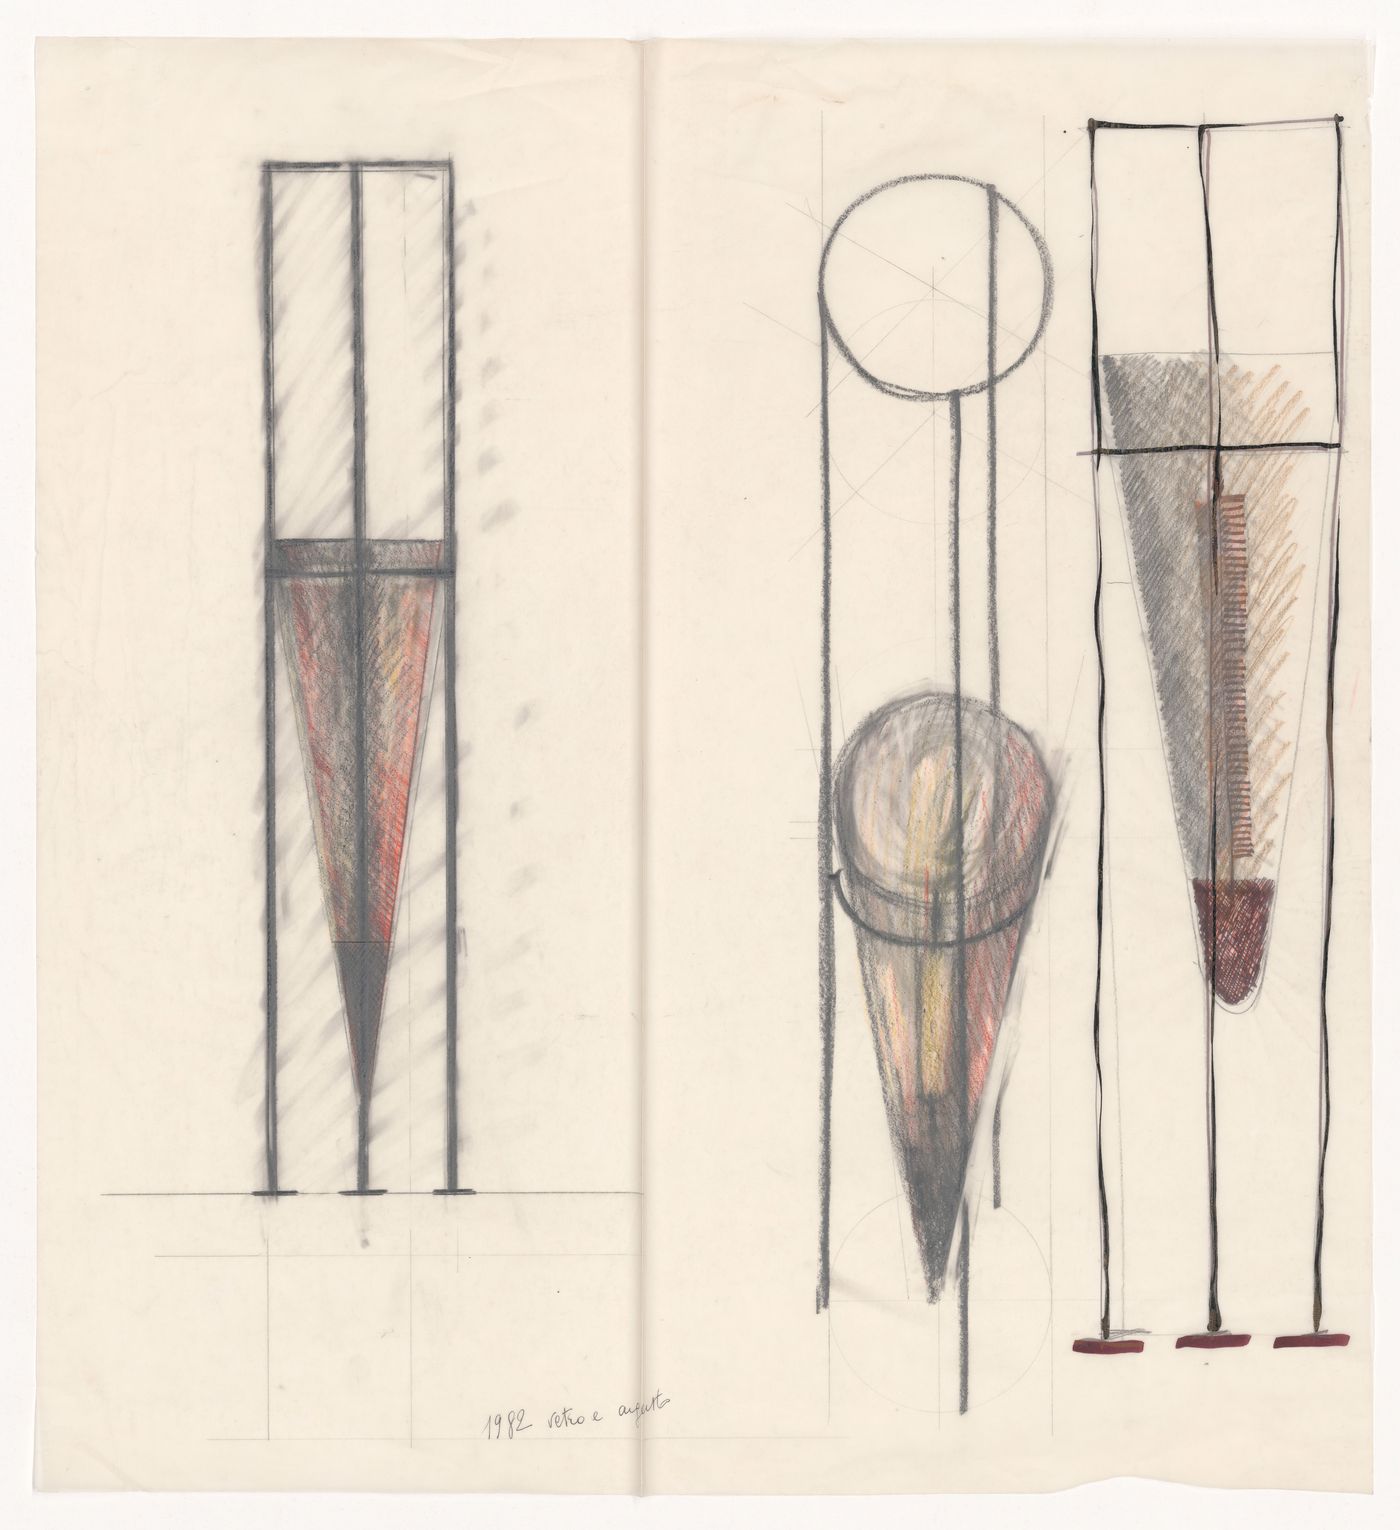 Three sketches (from the project-file "Sketches and drawings on various projects, including lamp designs, 1970s-1980s")